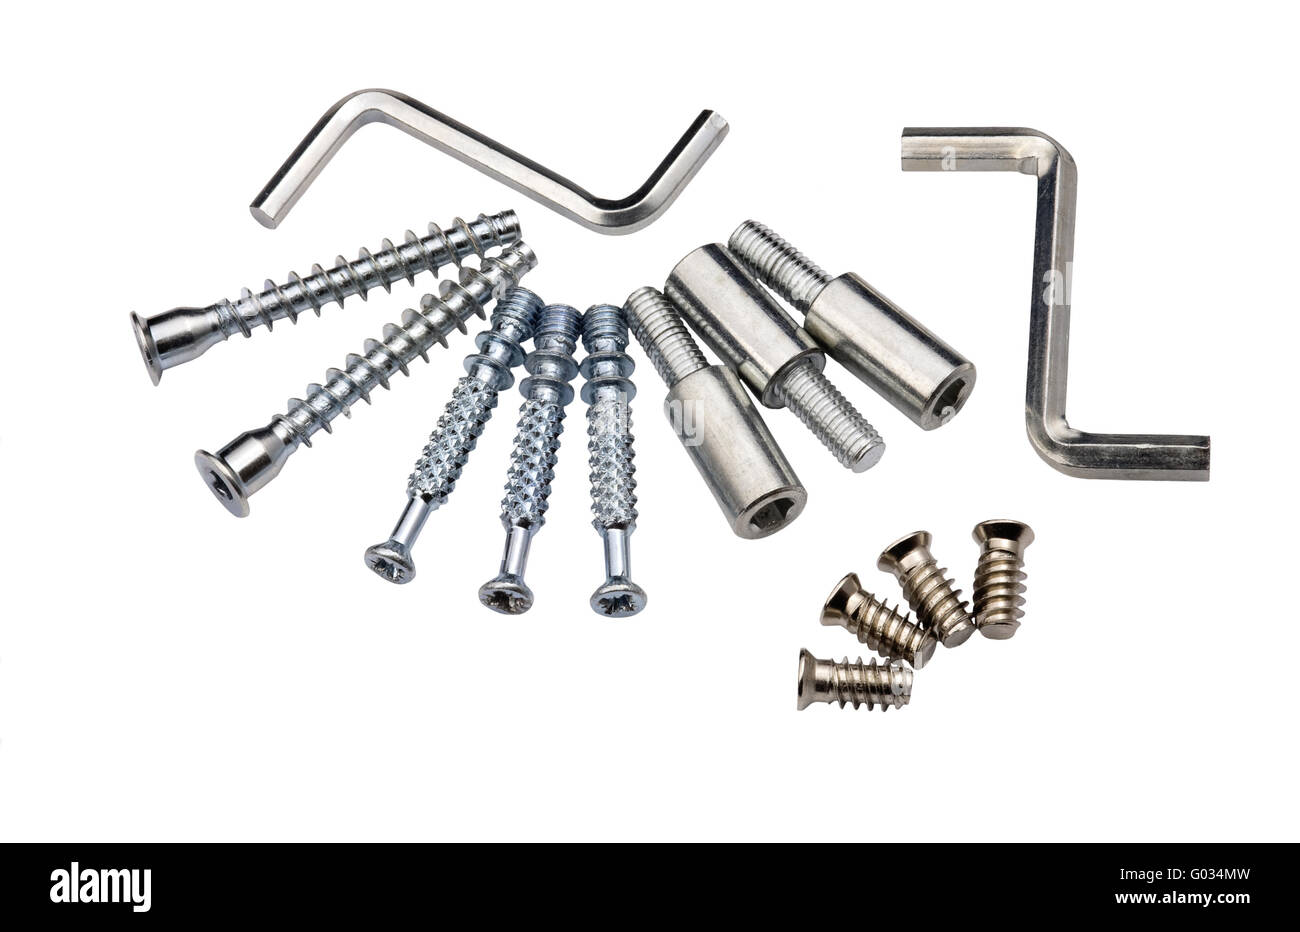 Set of modern bolts and screws for furniture assemblage Stock Photo